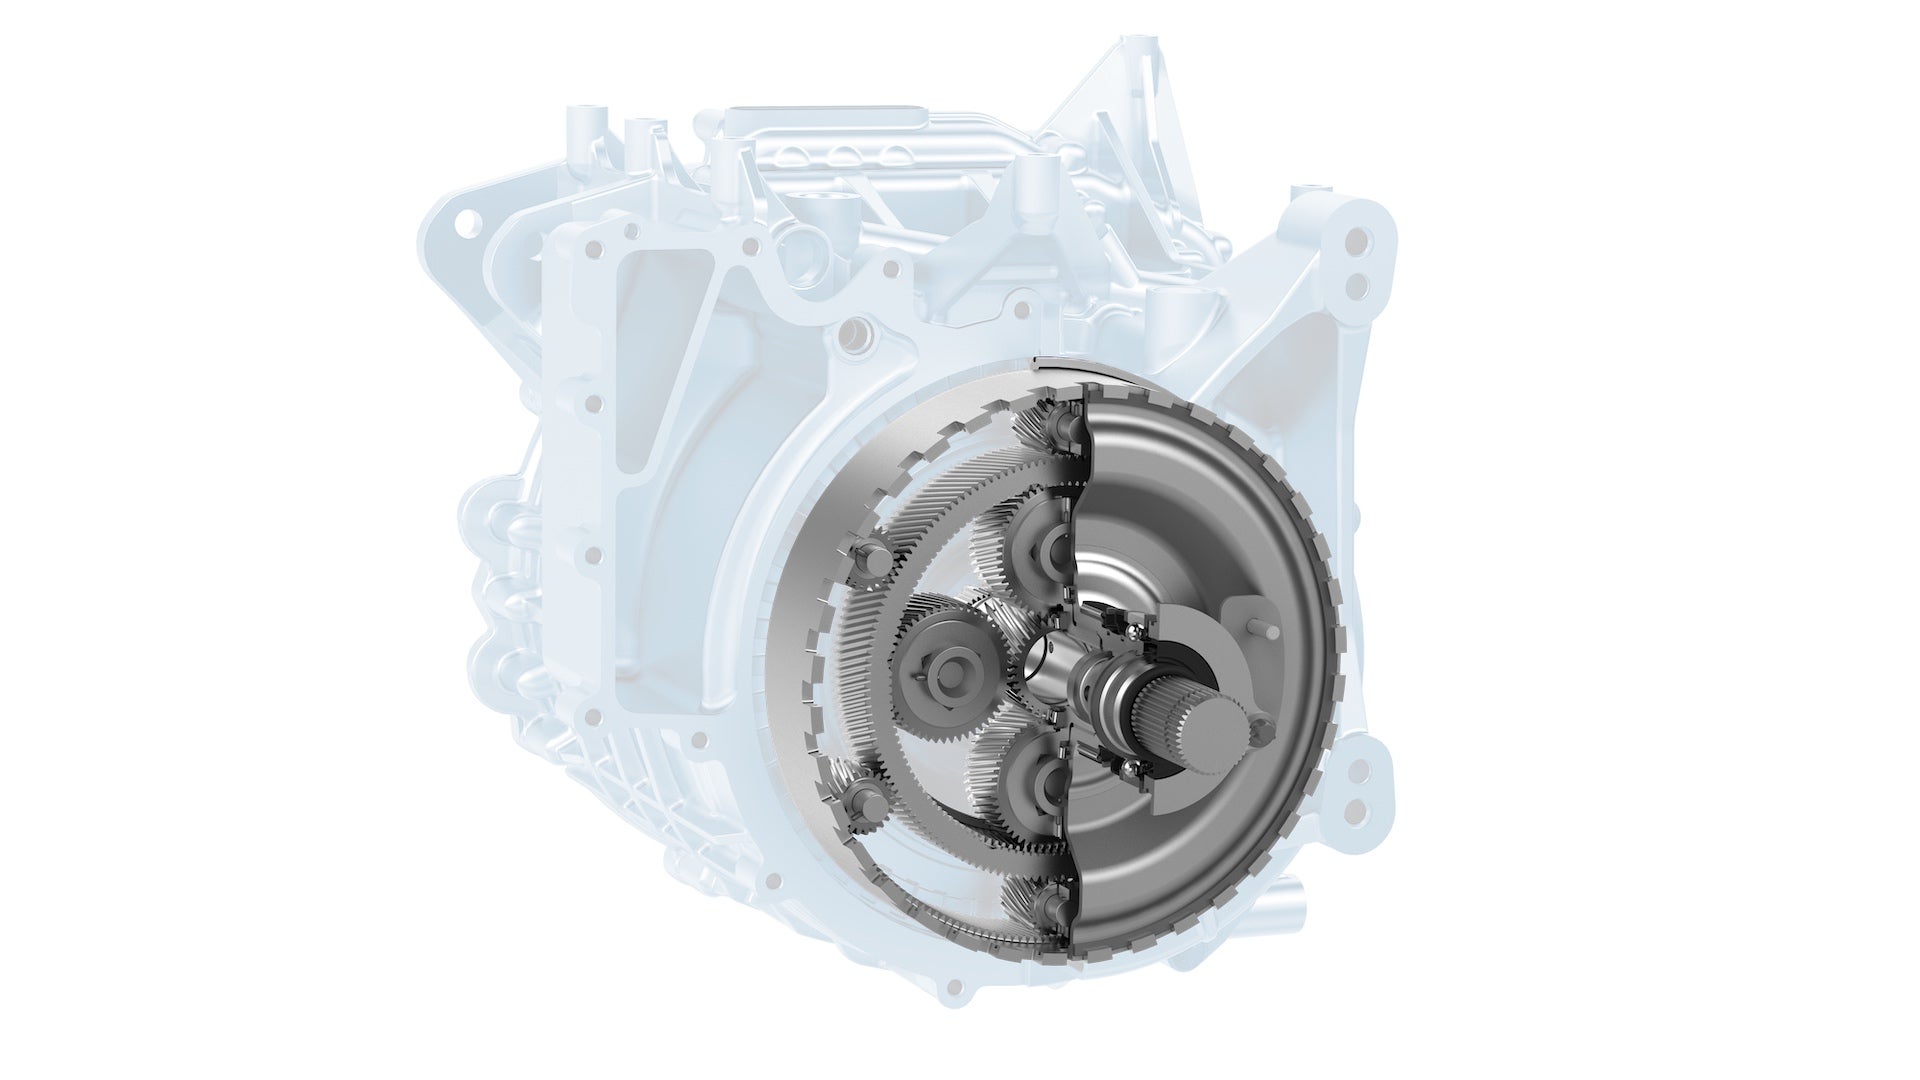 ZF’s Multi-Velocity Electrical Pressure Devices Make a Case for Transmissions in EVs